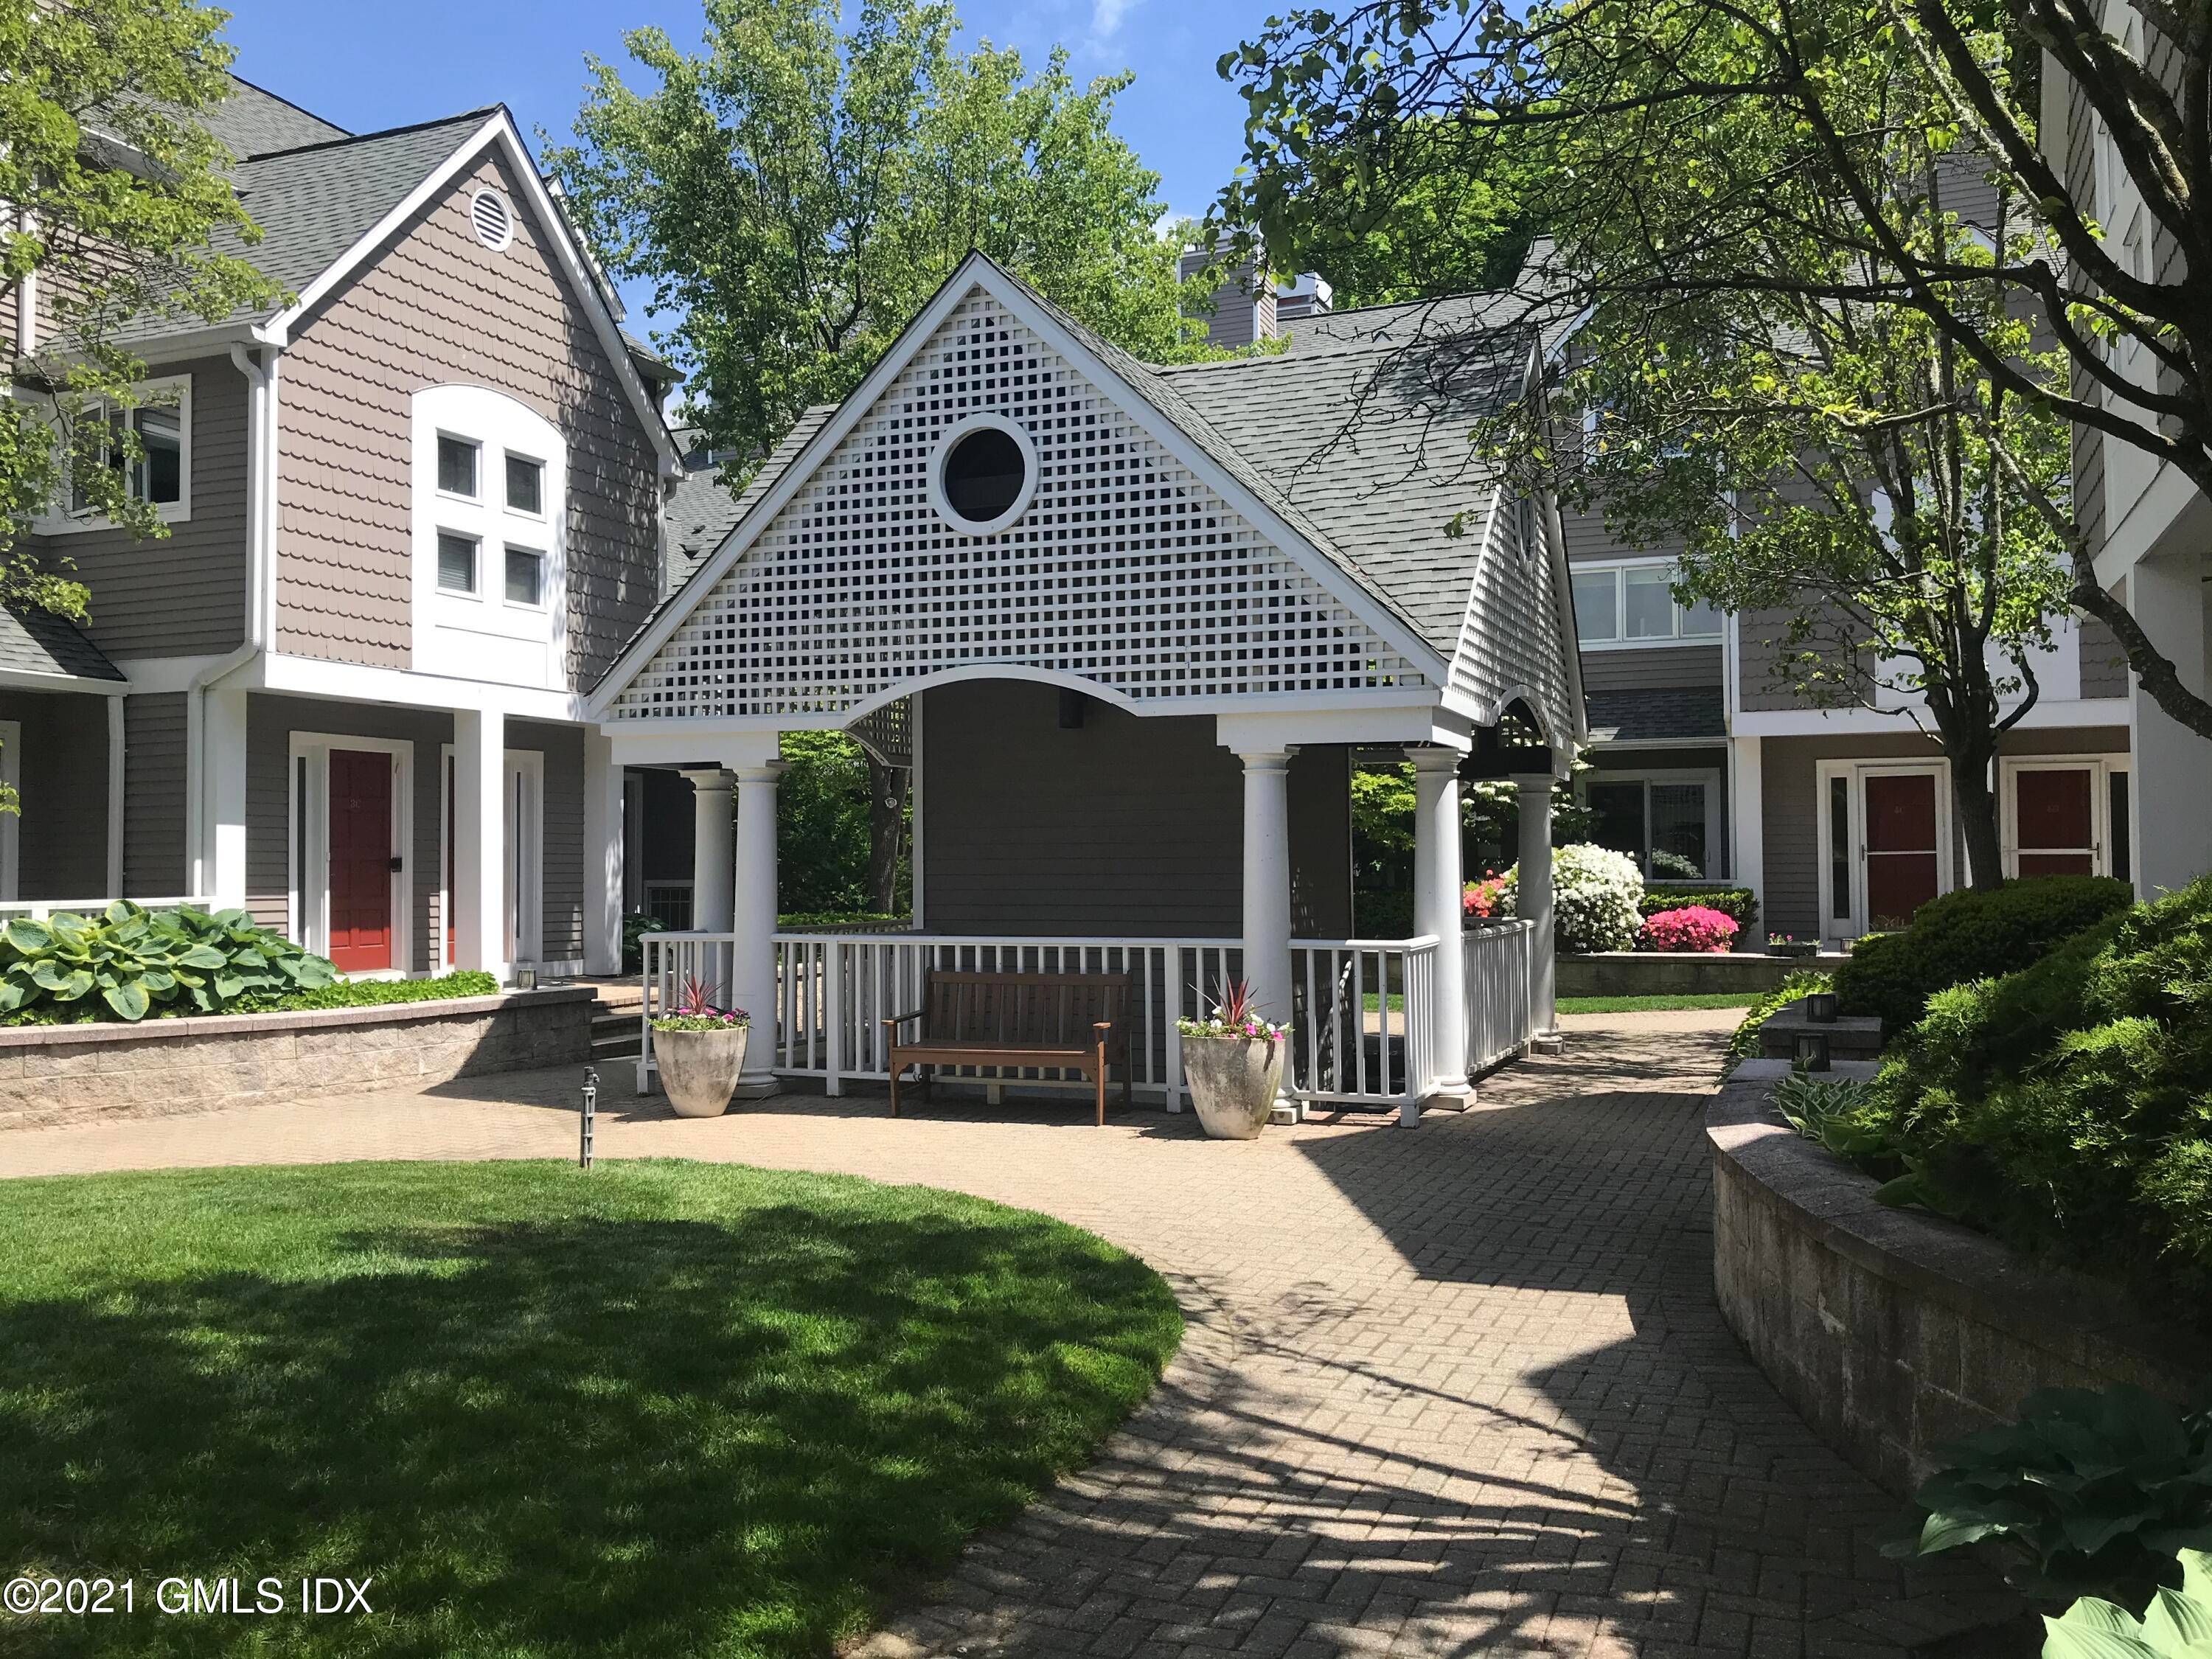 Perfectly located, this two story two bedroom two and a half bathroom townhouse with lots of natural light boasts an open layout and hardwood floors throughout.